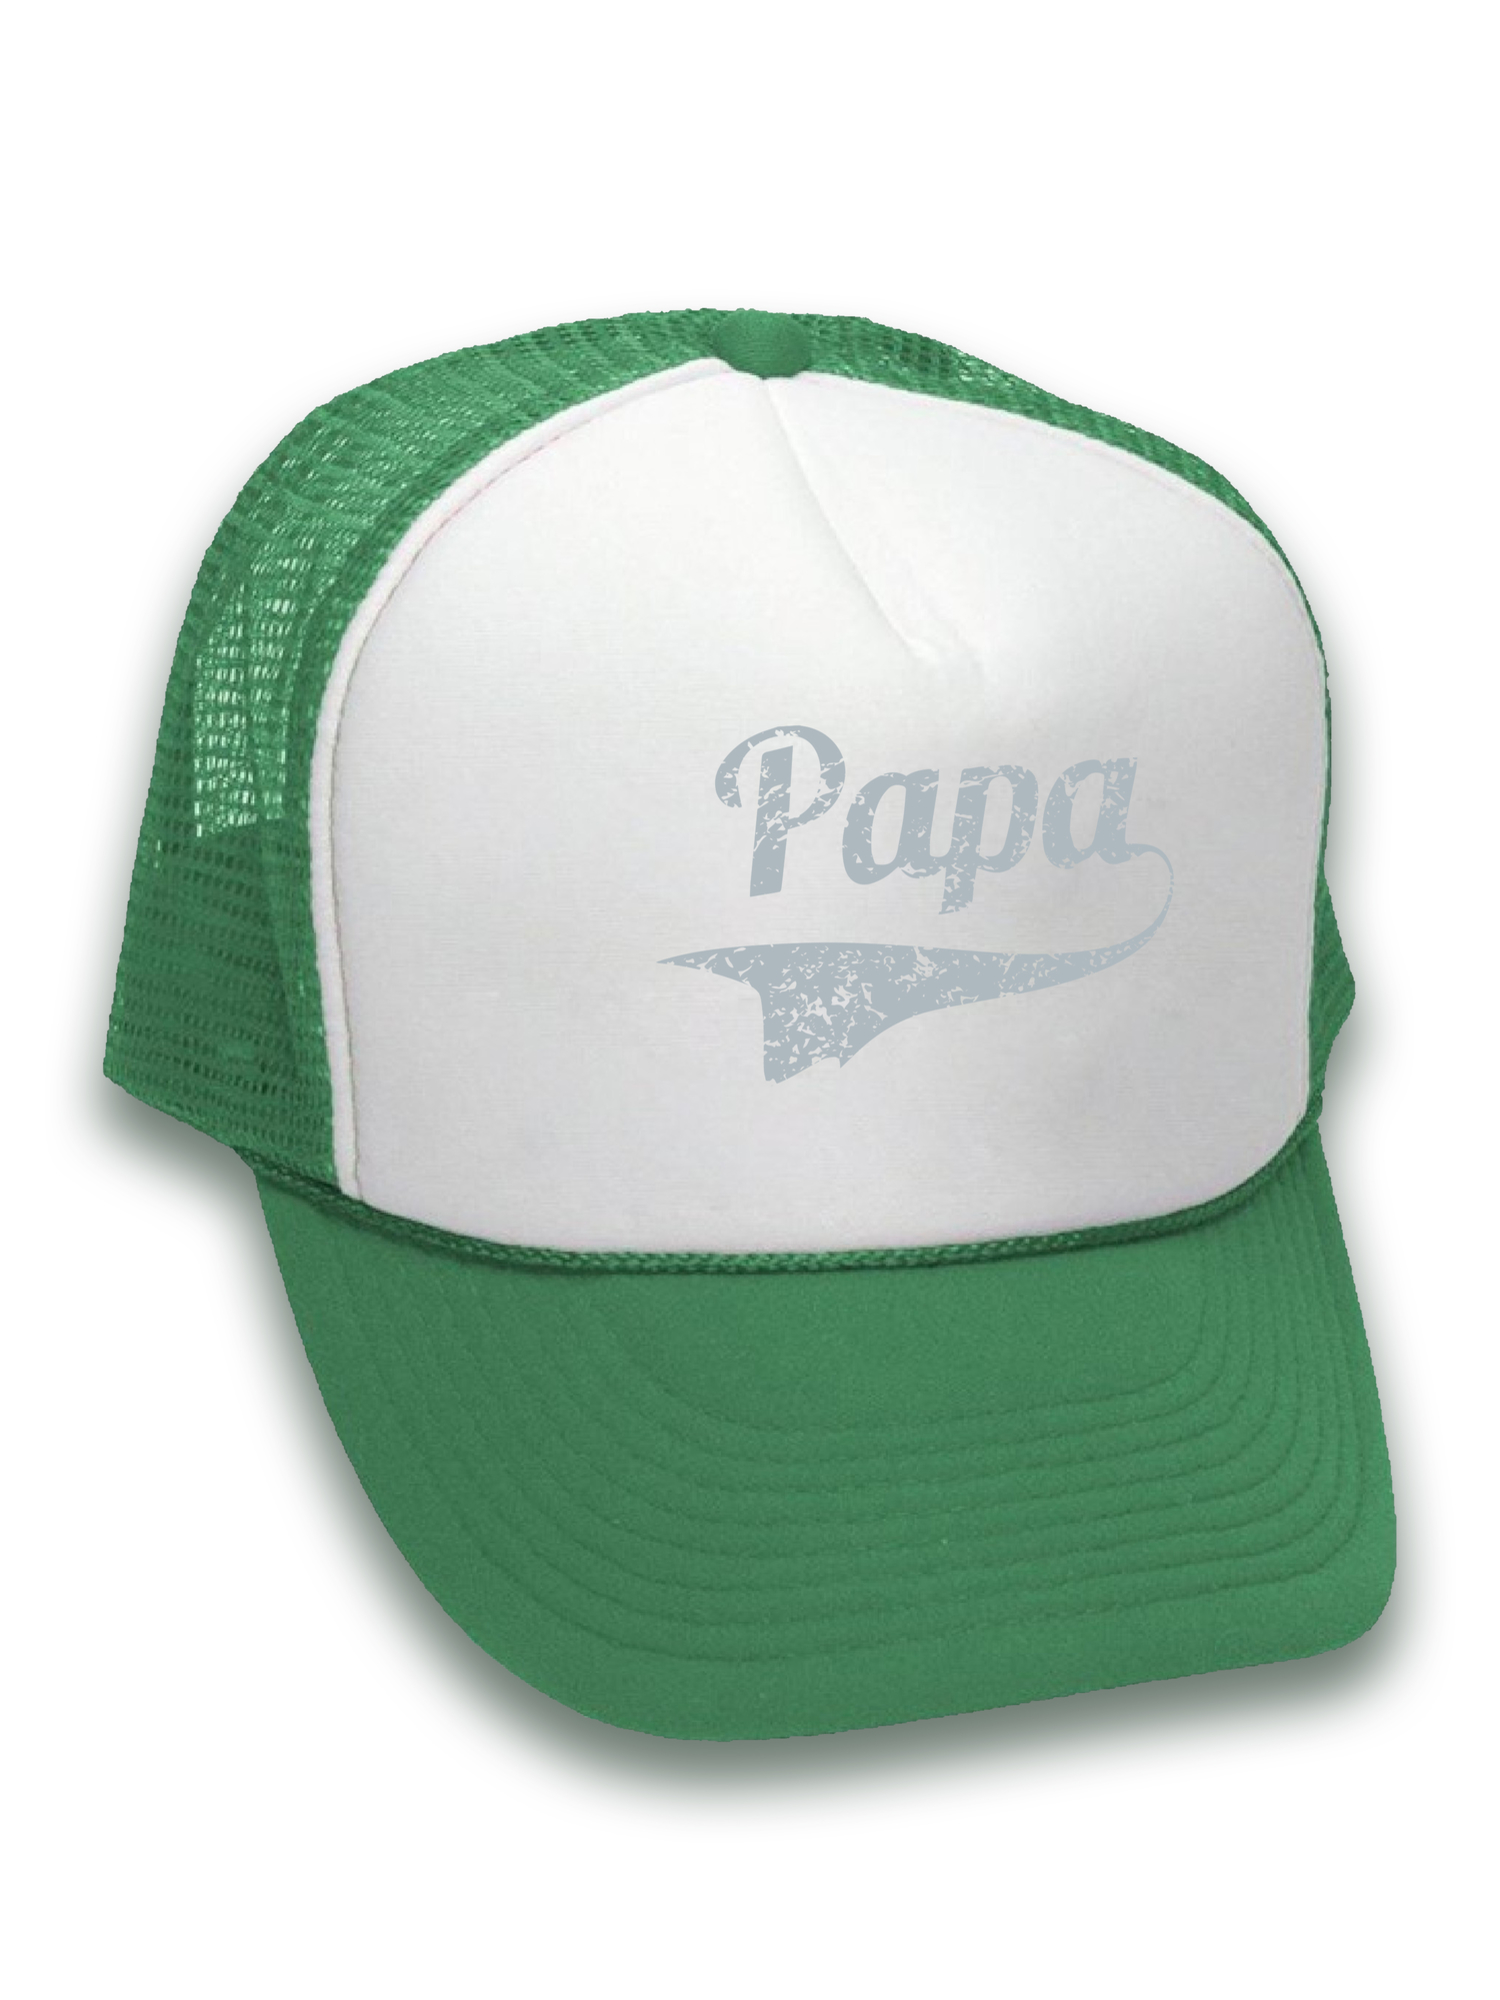 Awkward Styles Papa Trucker Hat Father's Day Gifts for Men Dad Hats Dad 2018 Trucker Hat Funny Gifts for Dad Hat Accessories for Men Father Trucker Hat Daddy 2018 Snapback Hat Dad Hats with Sayings - image 2 of 6